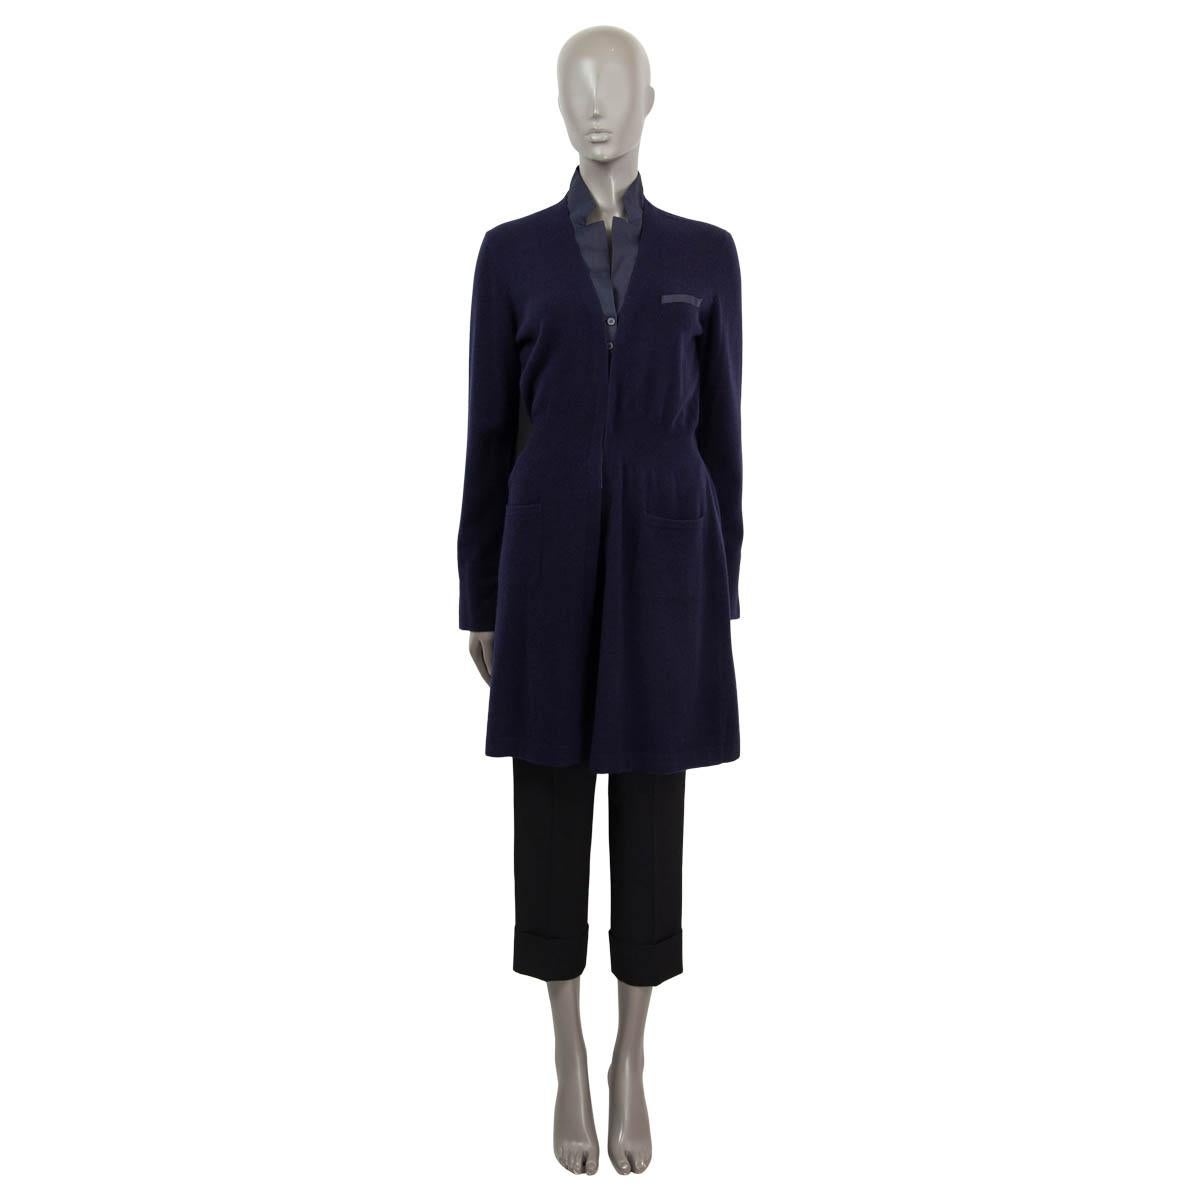 100% authentic Brunello Cucinelli long-cut cardigan in navy blue cashmere (100%) with mock collared layer in ramie (100%). Closes with buttons on the front. Brand new.

Measurements
Tag Size	L
Size	L
Shoulder Width	46cm (17.9in)
Bust To	94cm